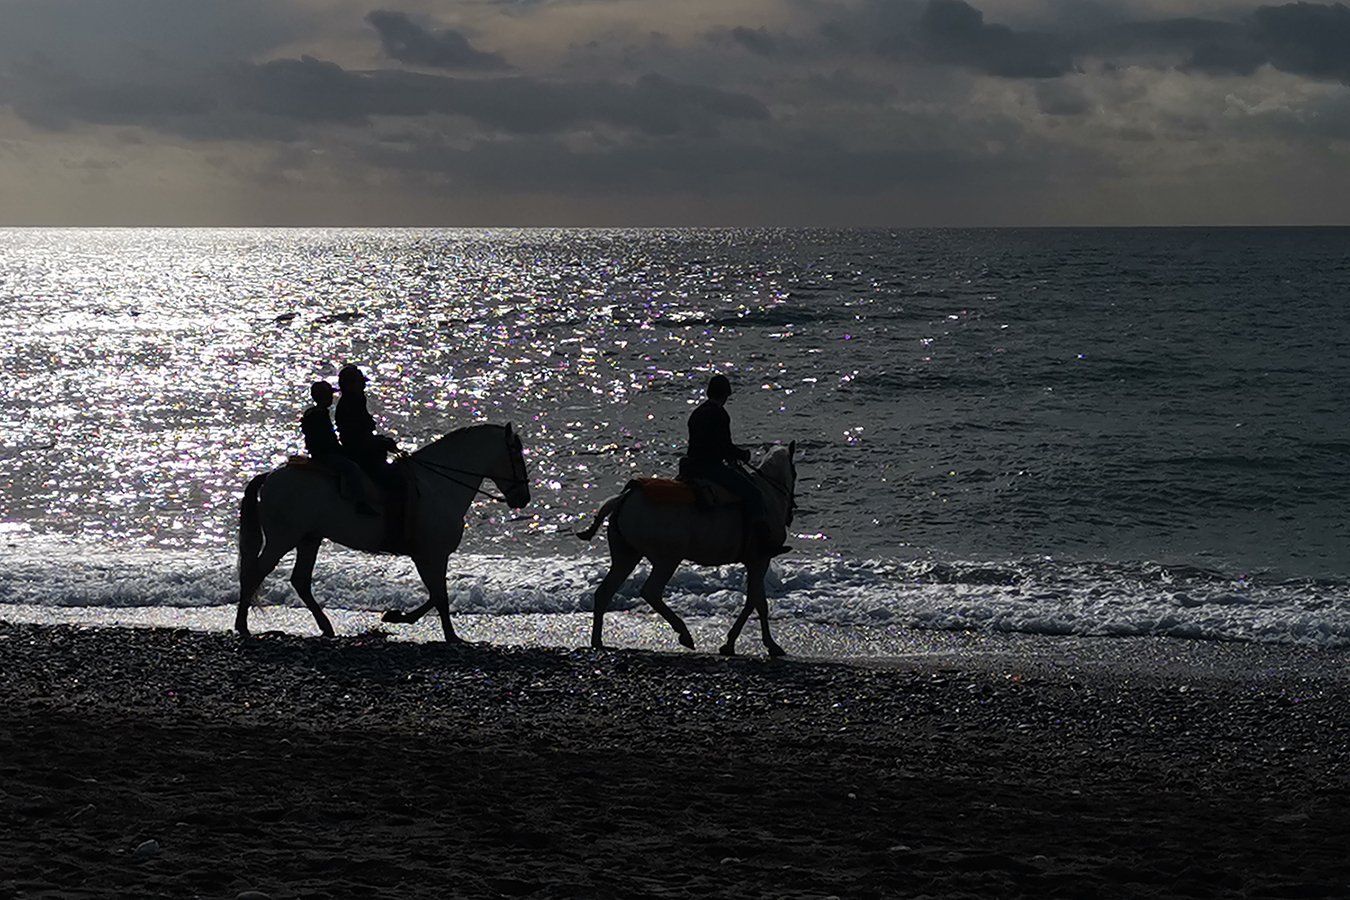 Taking up new hobbies. Horse riding on the beach